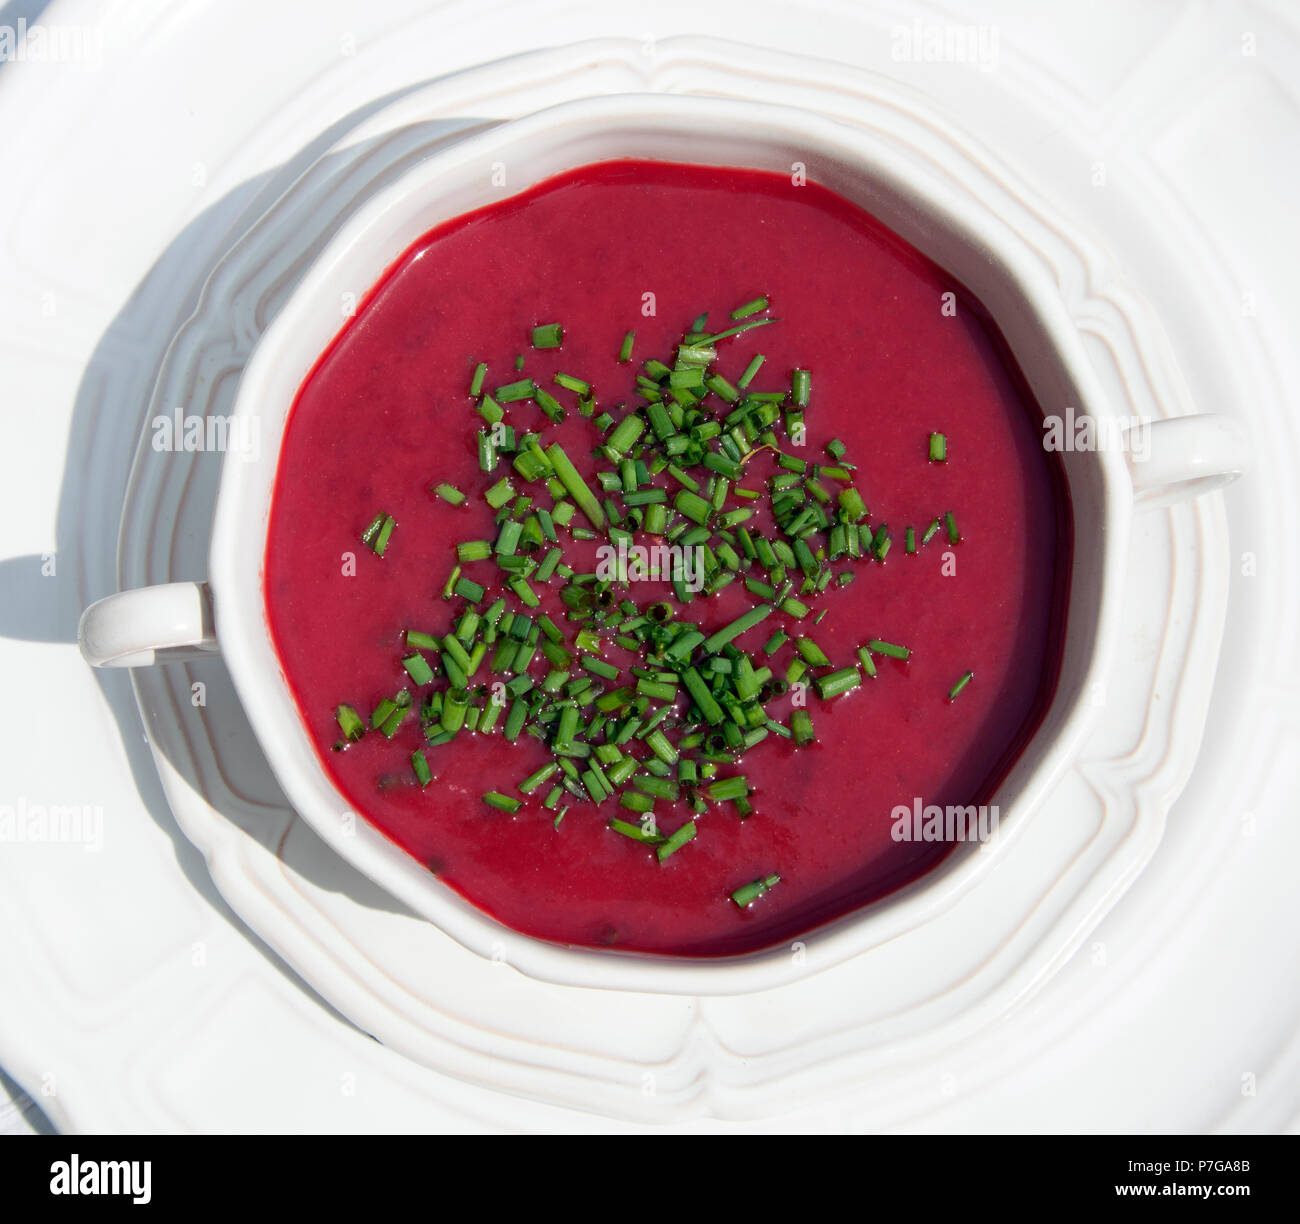 Homemade Borscht with freshly cut chives Stock Photo